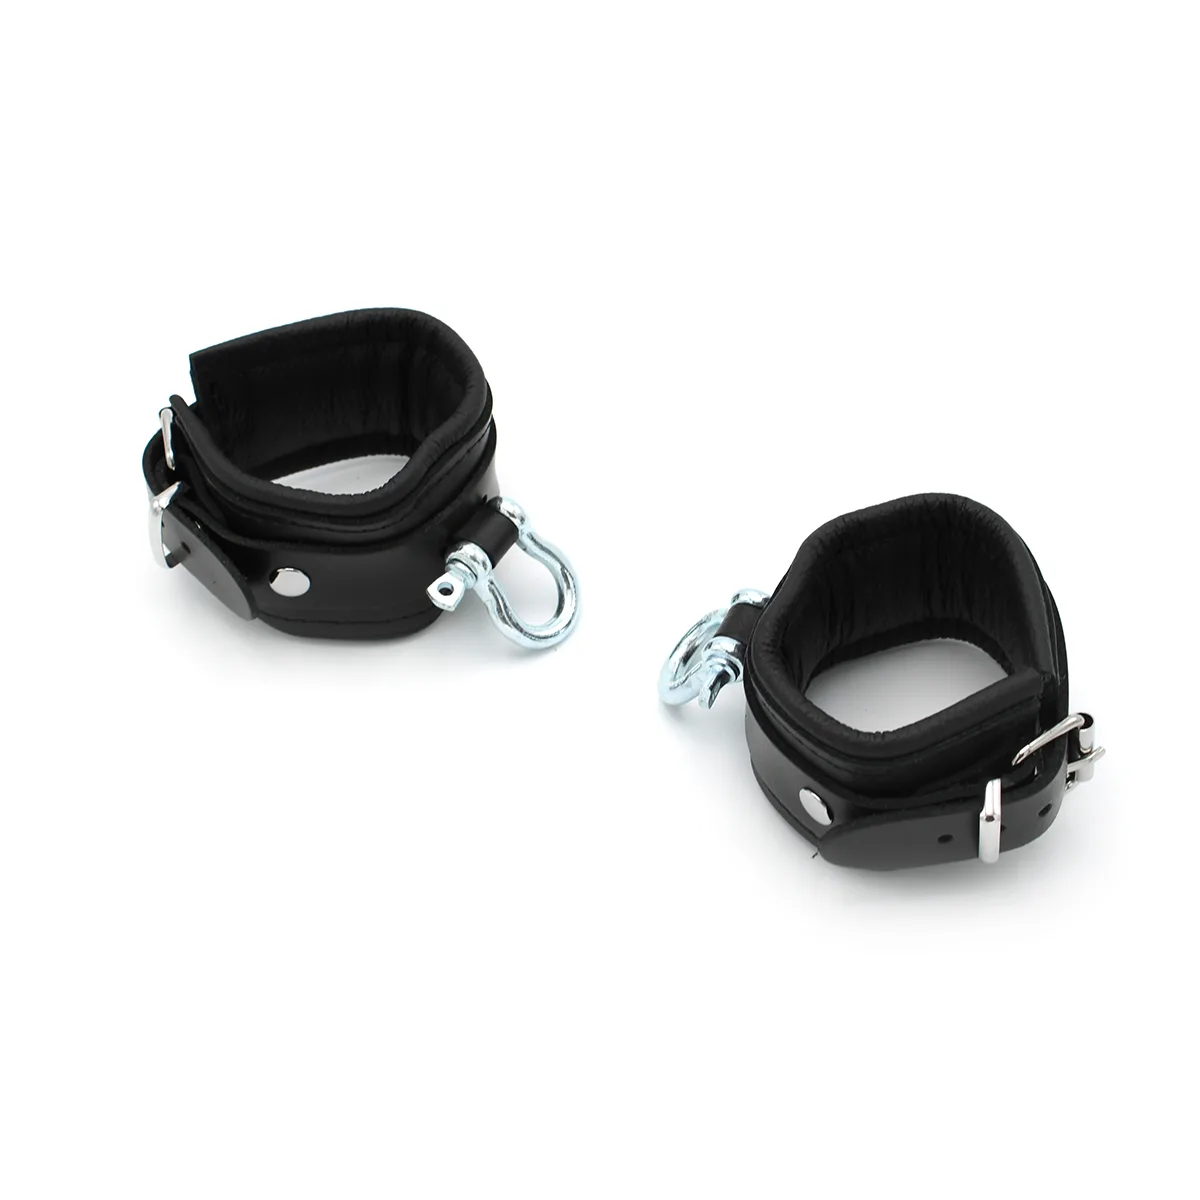 Leather-Handcuffs-with-Metal-Shackle-134-KIO-0371-4